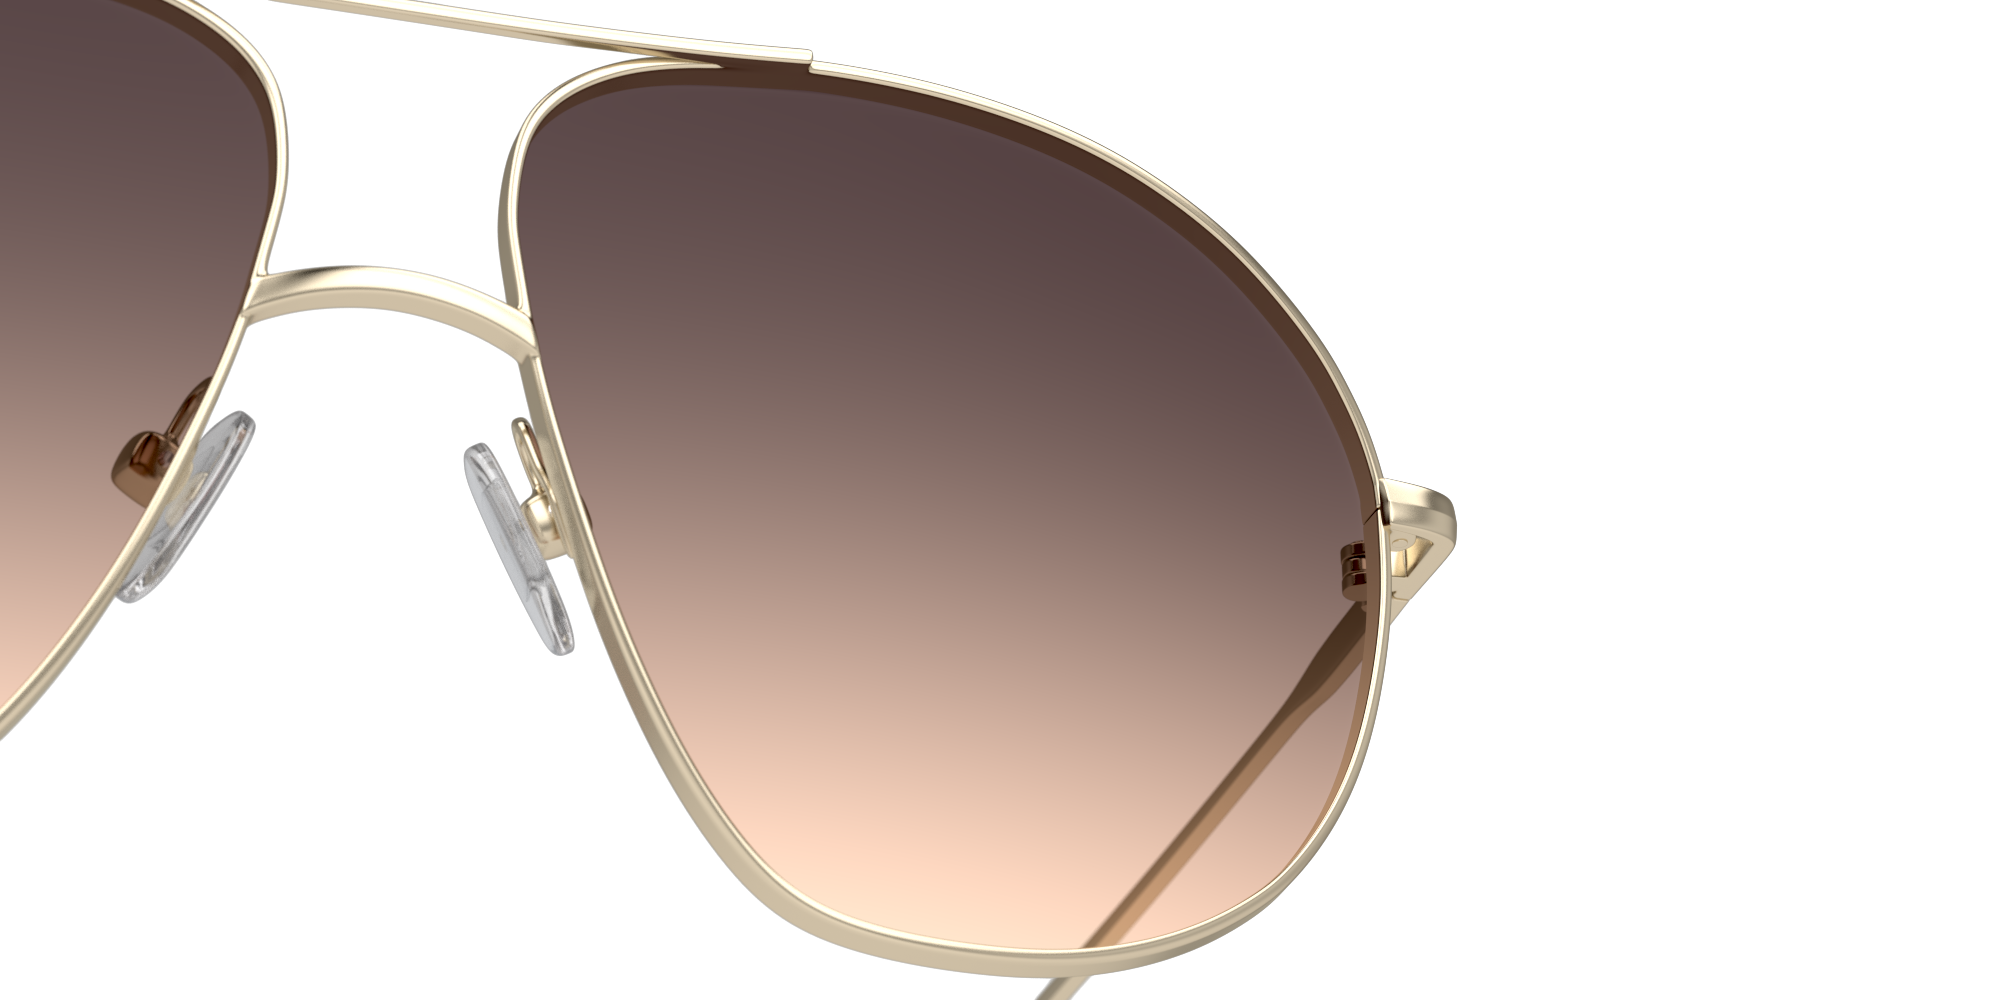 Detail01 Unofficial UNSF0183 (DDP0) Sunglasses Pink / Gold